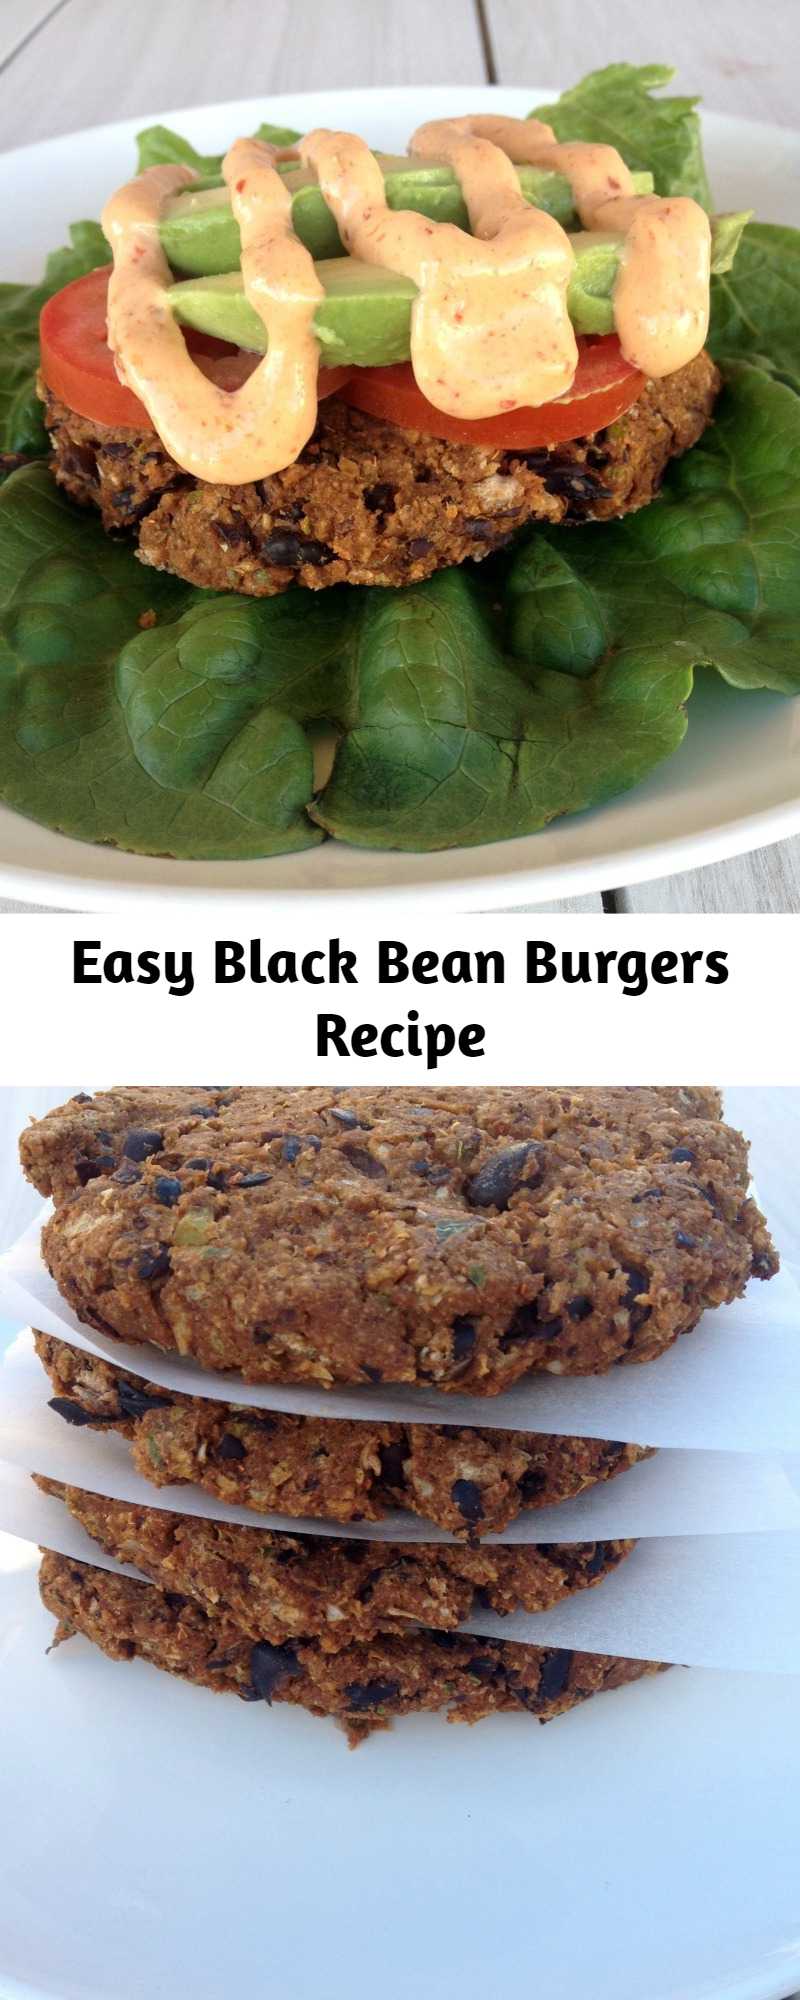 Easy Black Bean Burgers Recipe - These are THE BEST Black Bean Burgers I have ever had! Easy, healthy and so delicious!